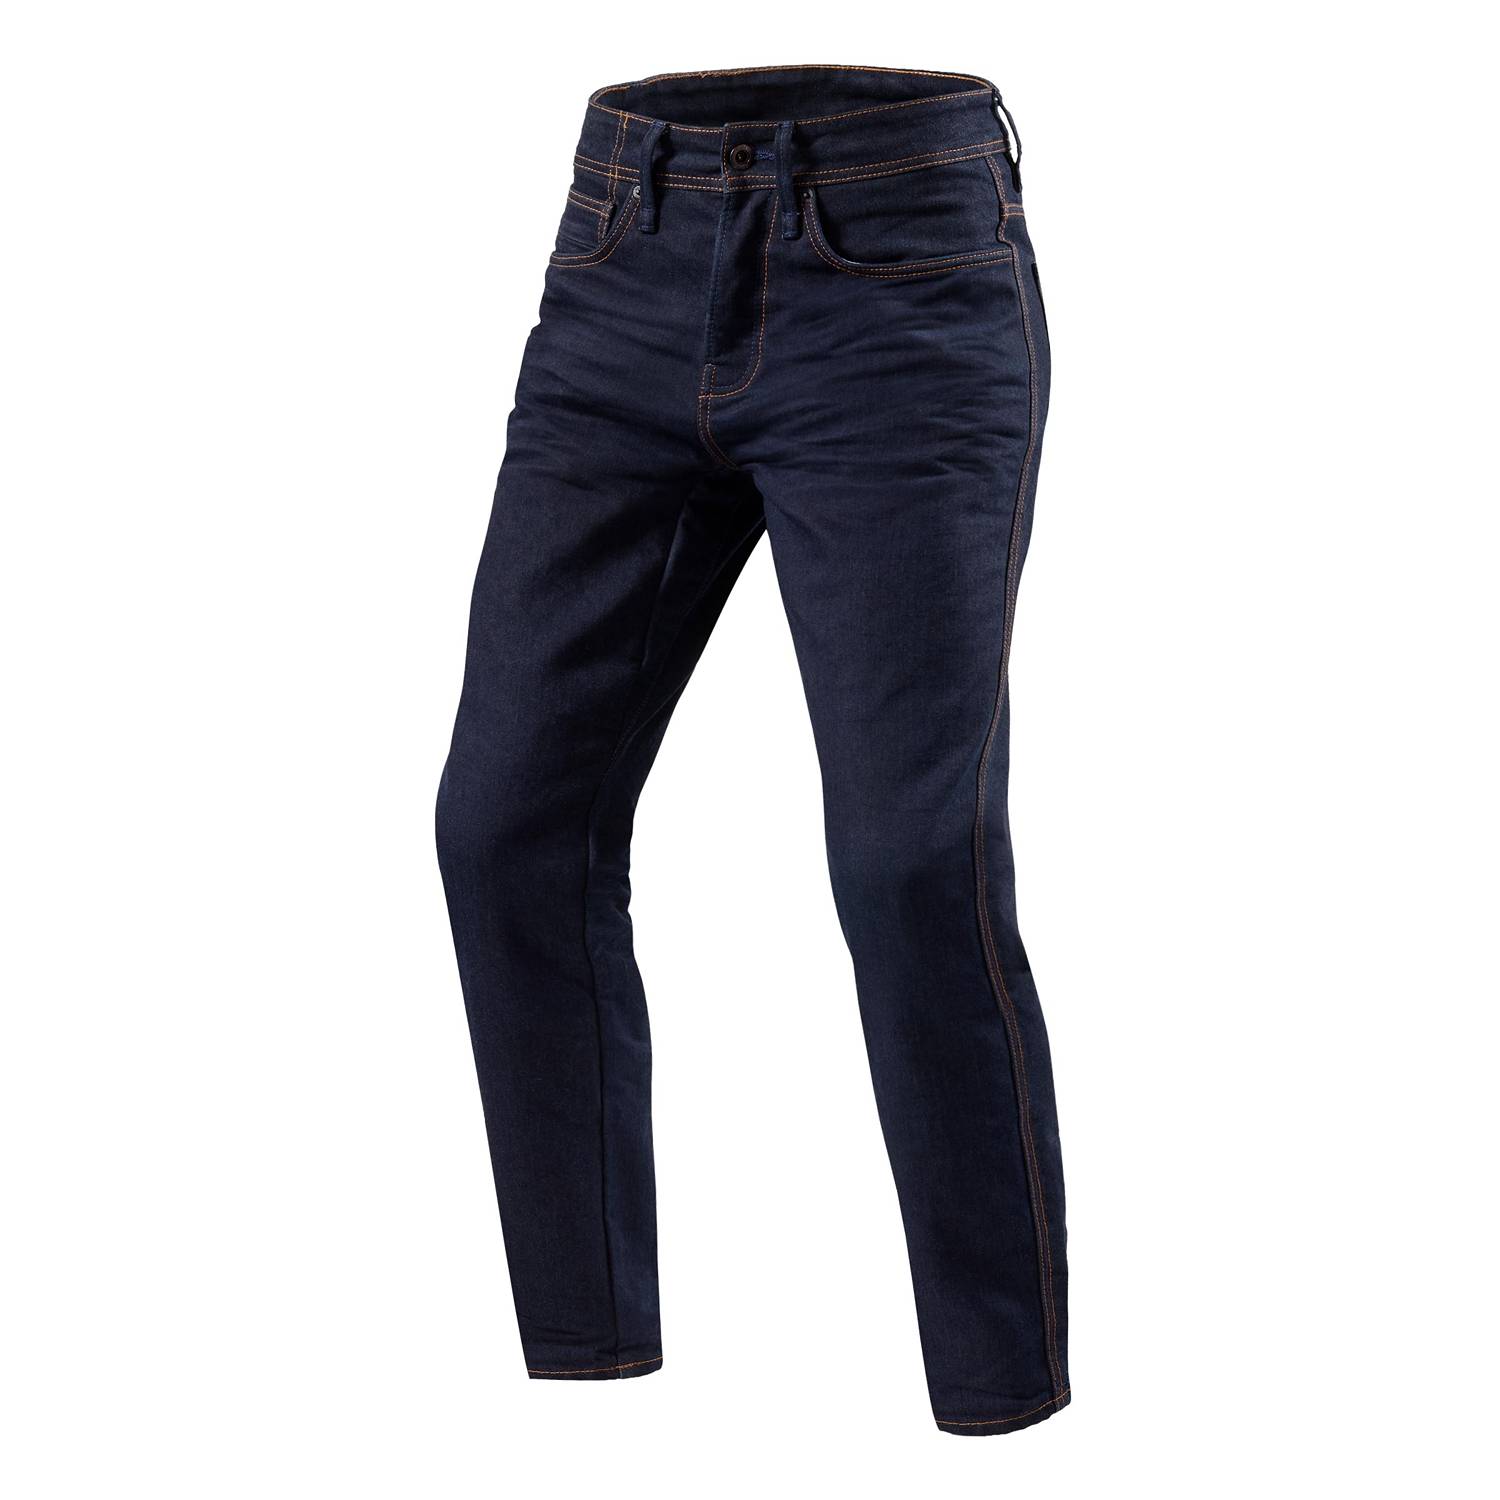 Image of REV'IT! Jeans Reed RF Dark Blue Used Motorcycle Jeans Size L36/W38 ID 8700001337120